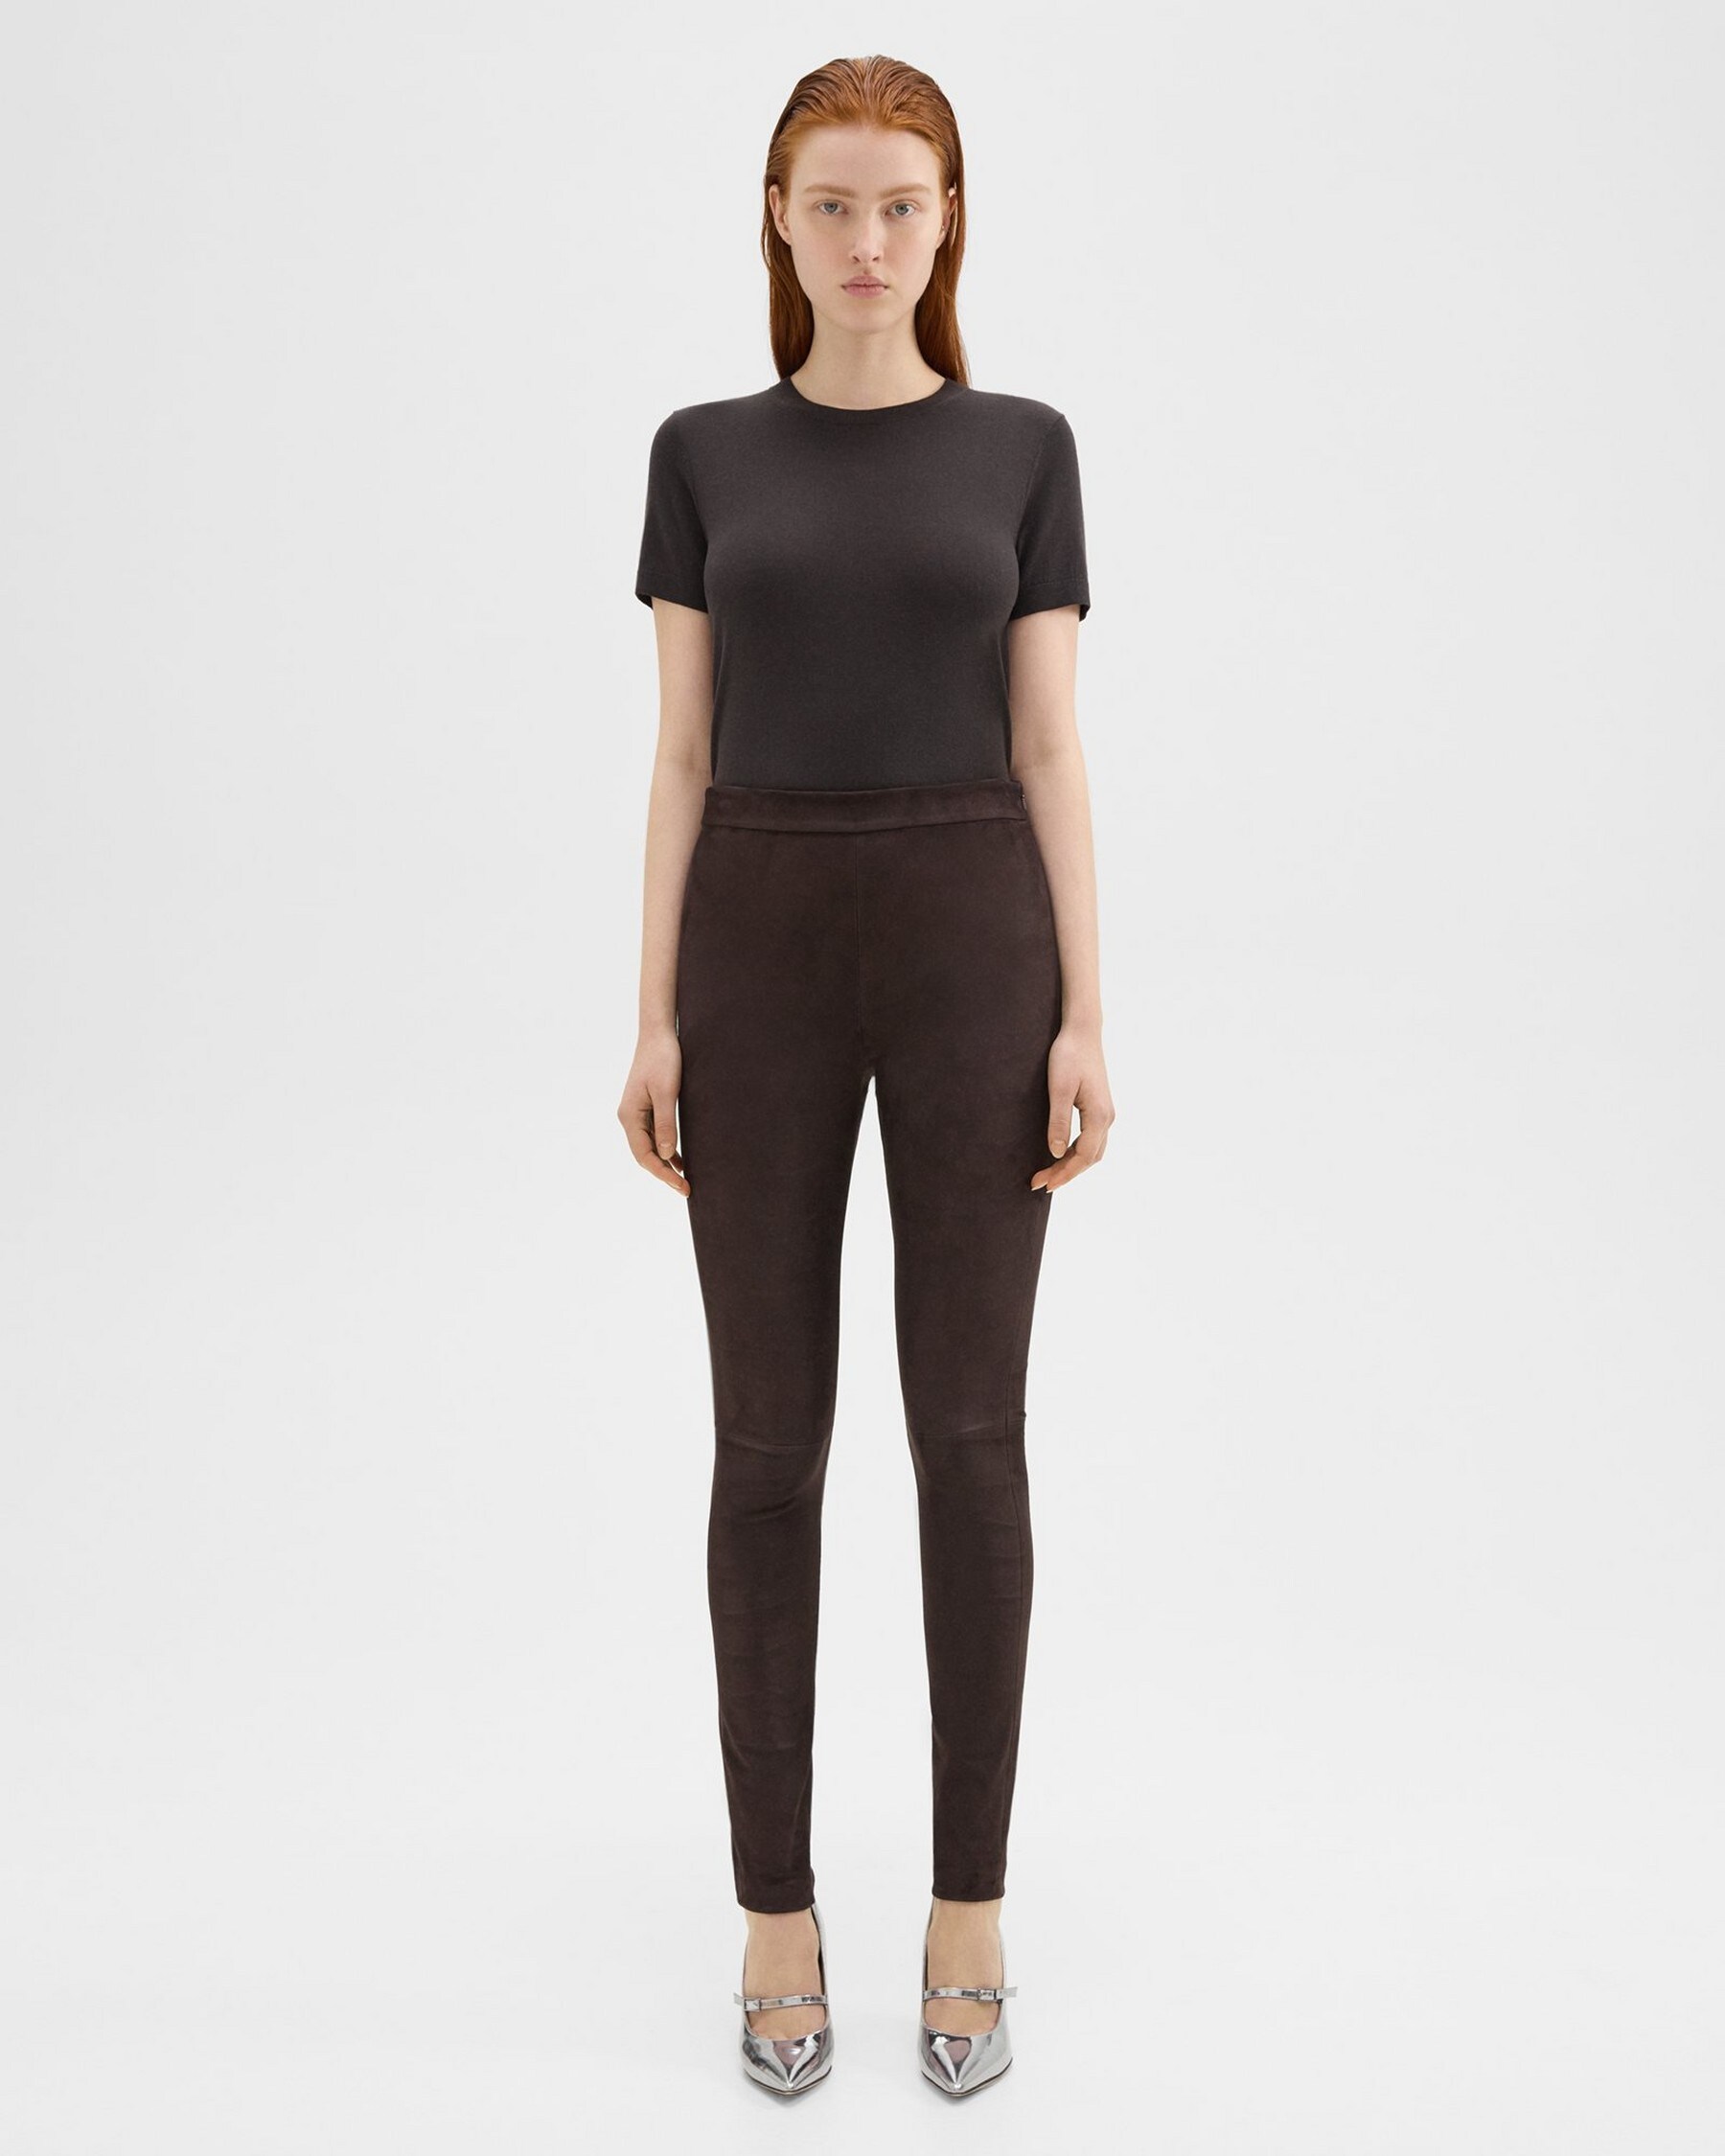 Theory High-Waist Legging in Suede